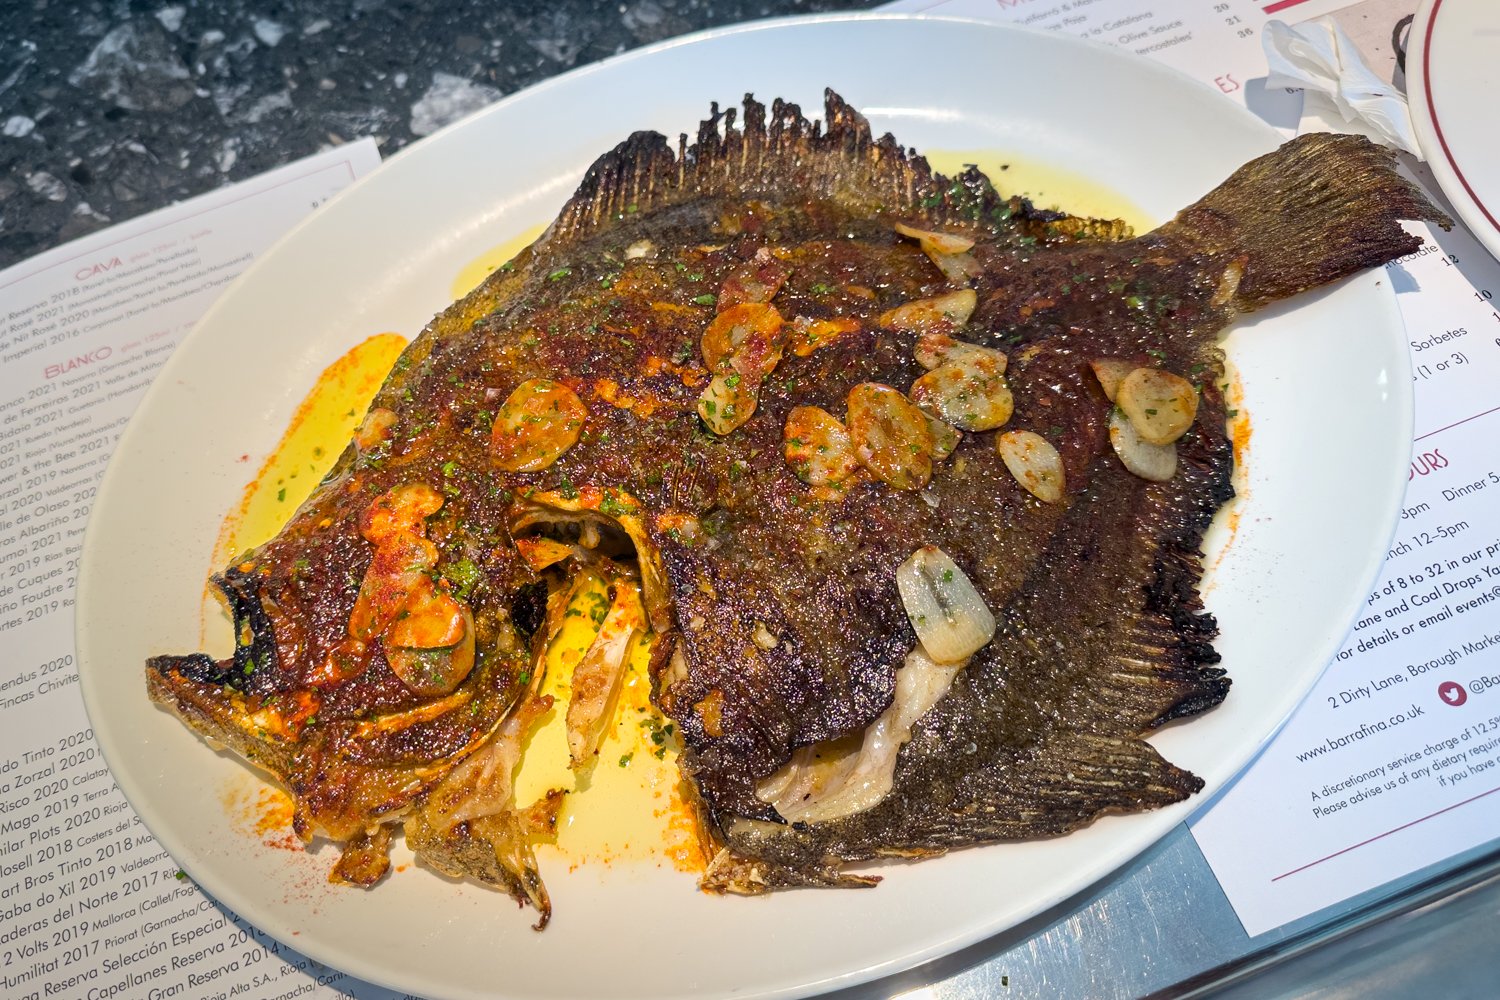  Turbot ajada: The standout dish of our lunch and one of the best takes I've had of this dish. 